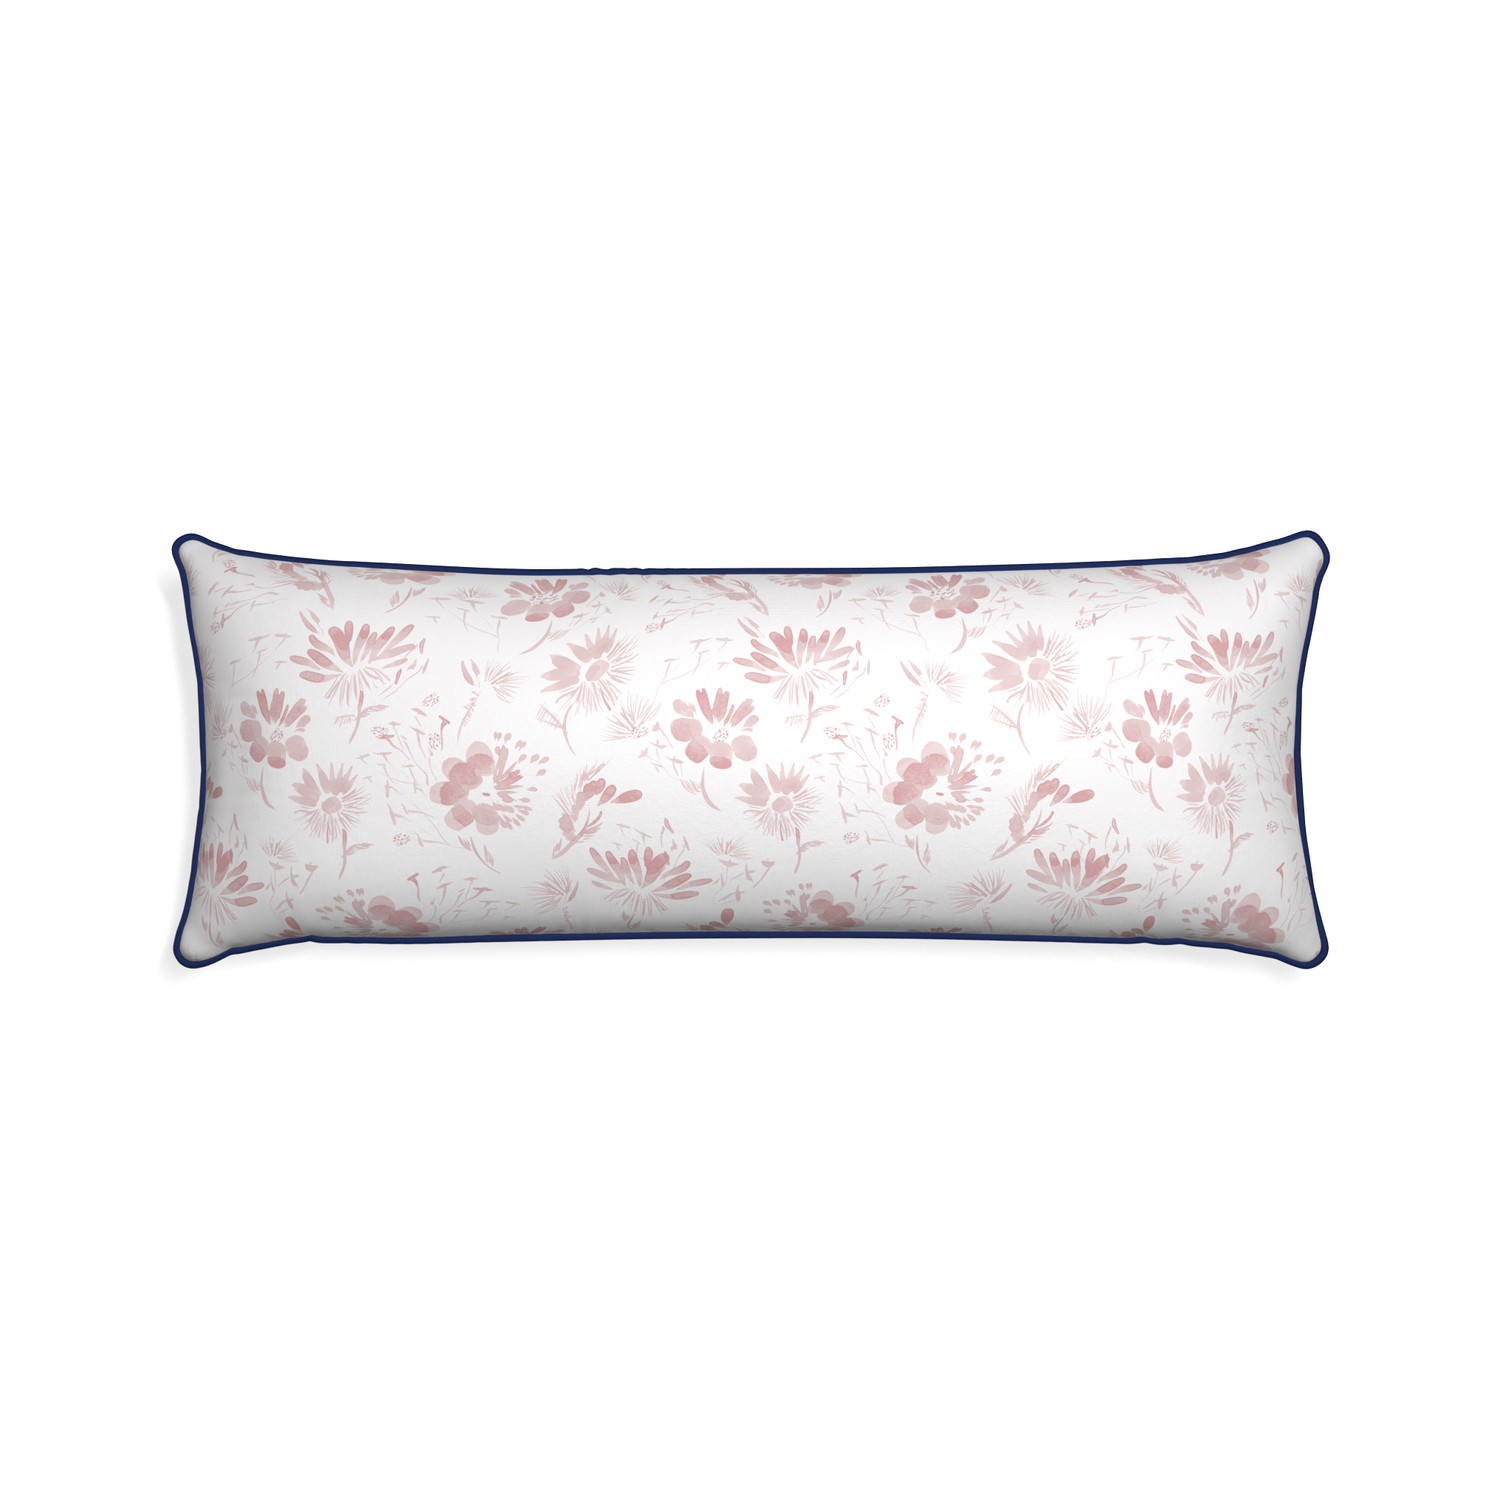 Xl-lumbar blake custom pink floralpillow with midnight piping on white background